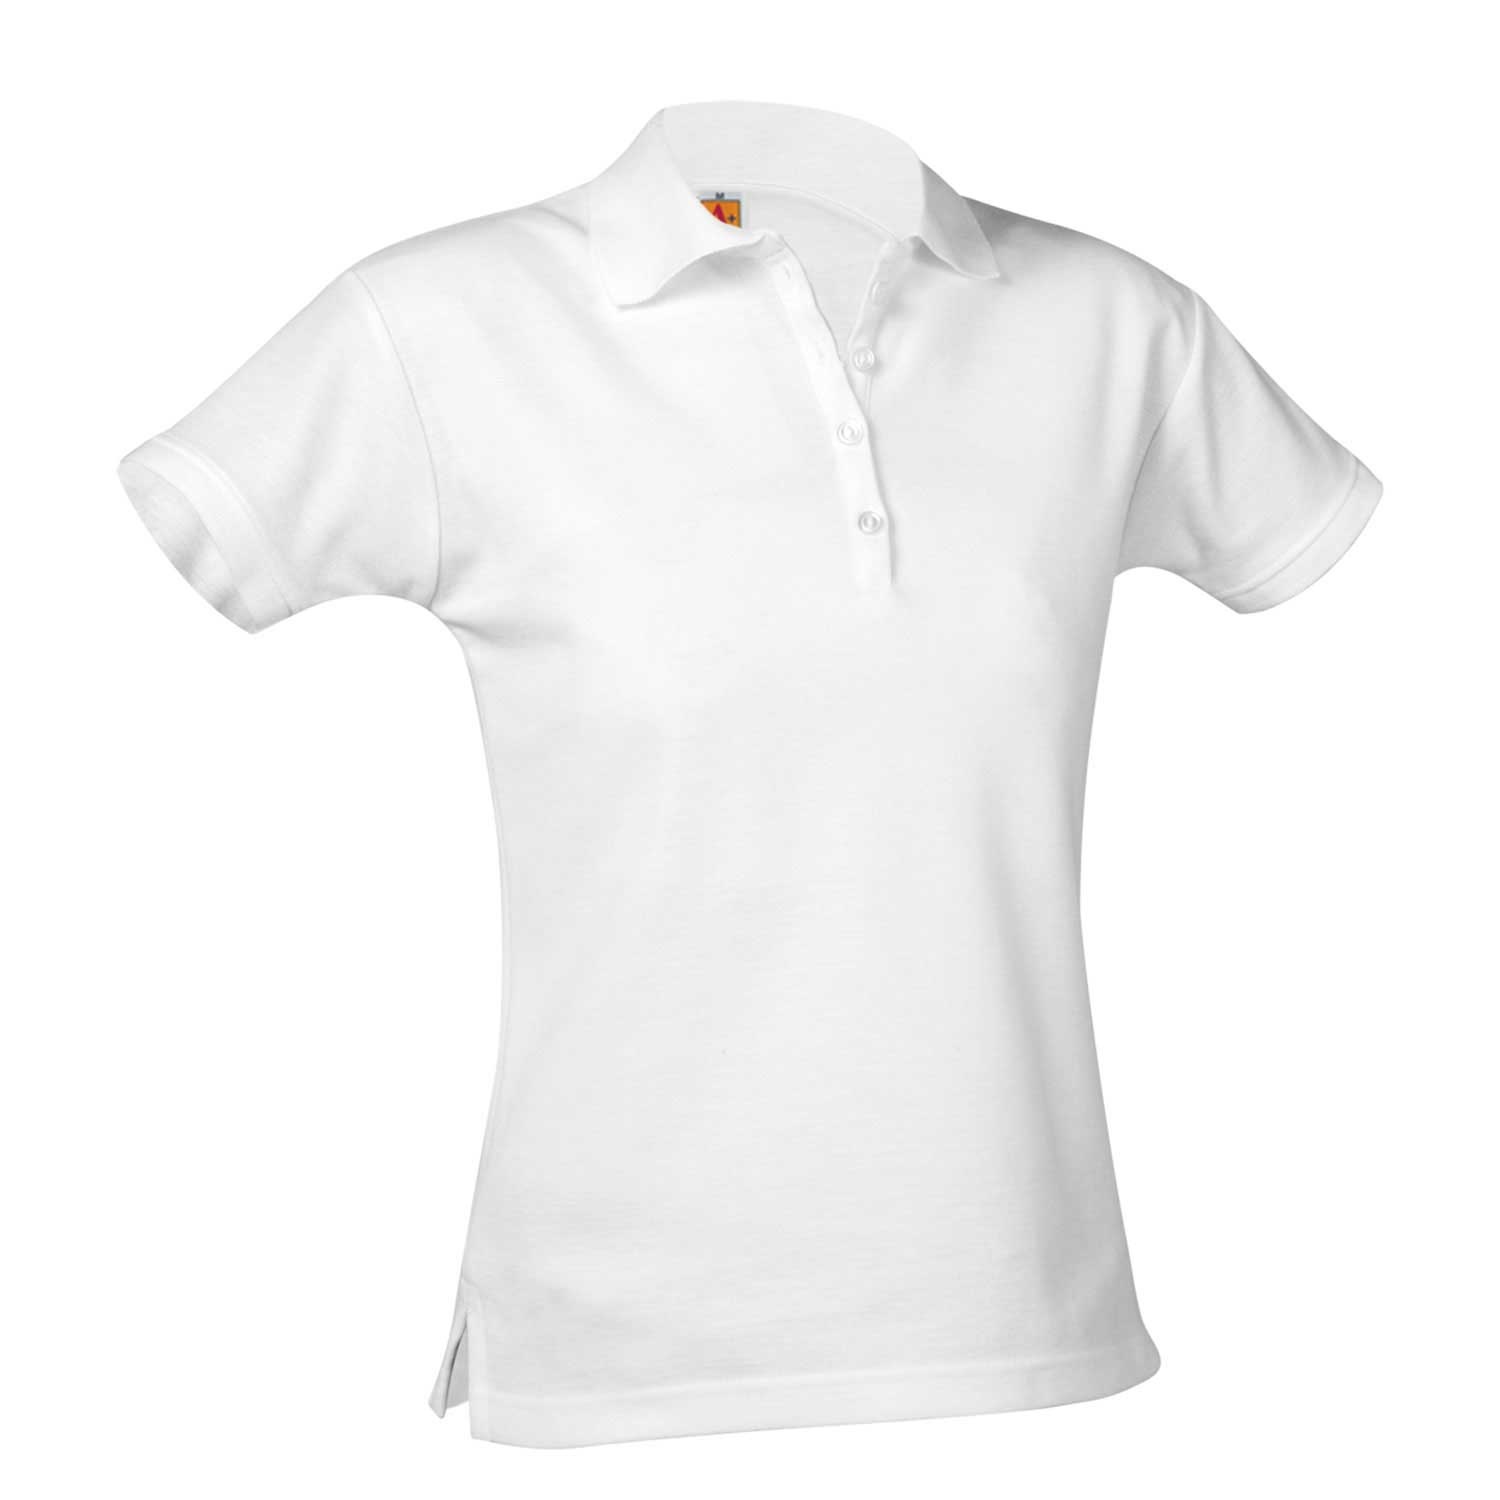 St. Philip Fitted Staff Polo